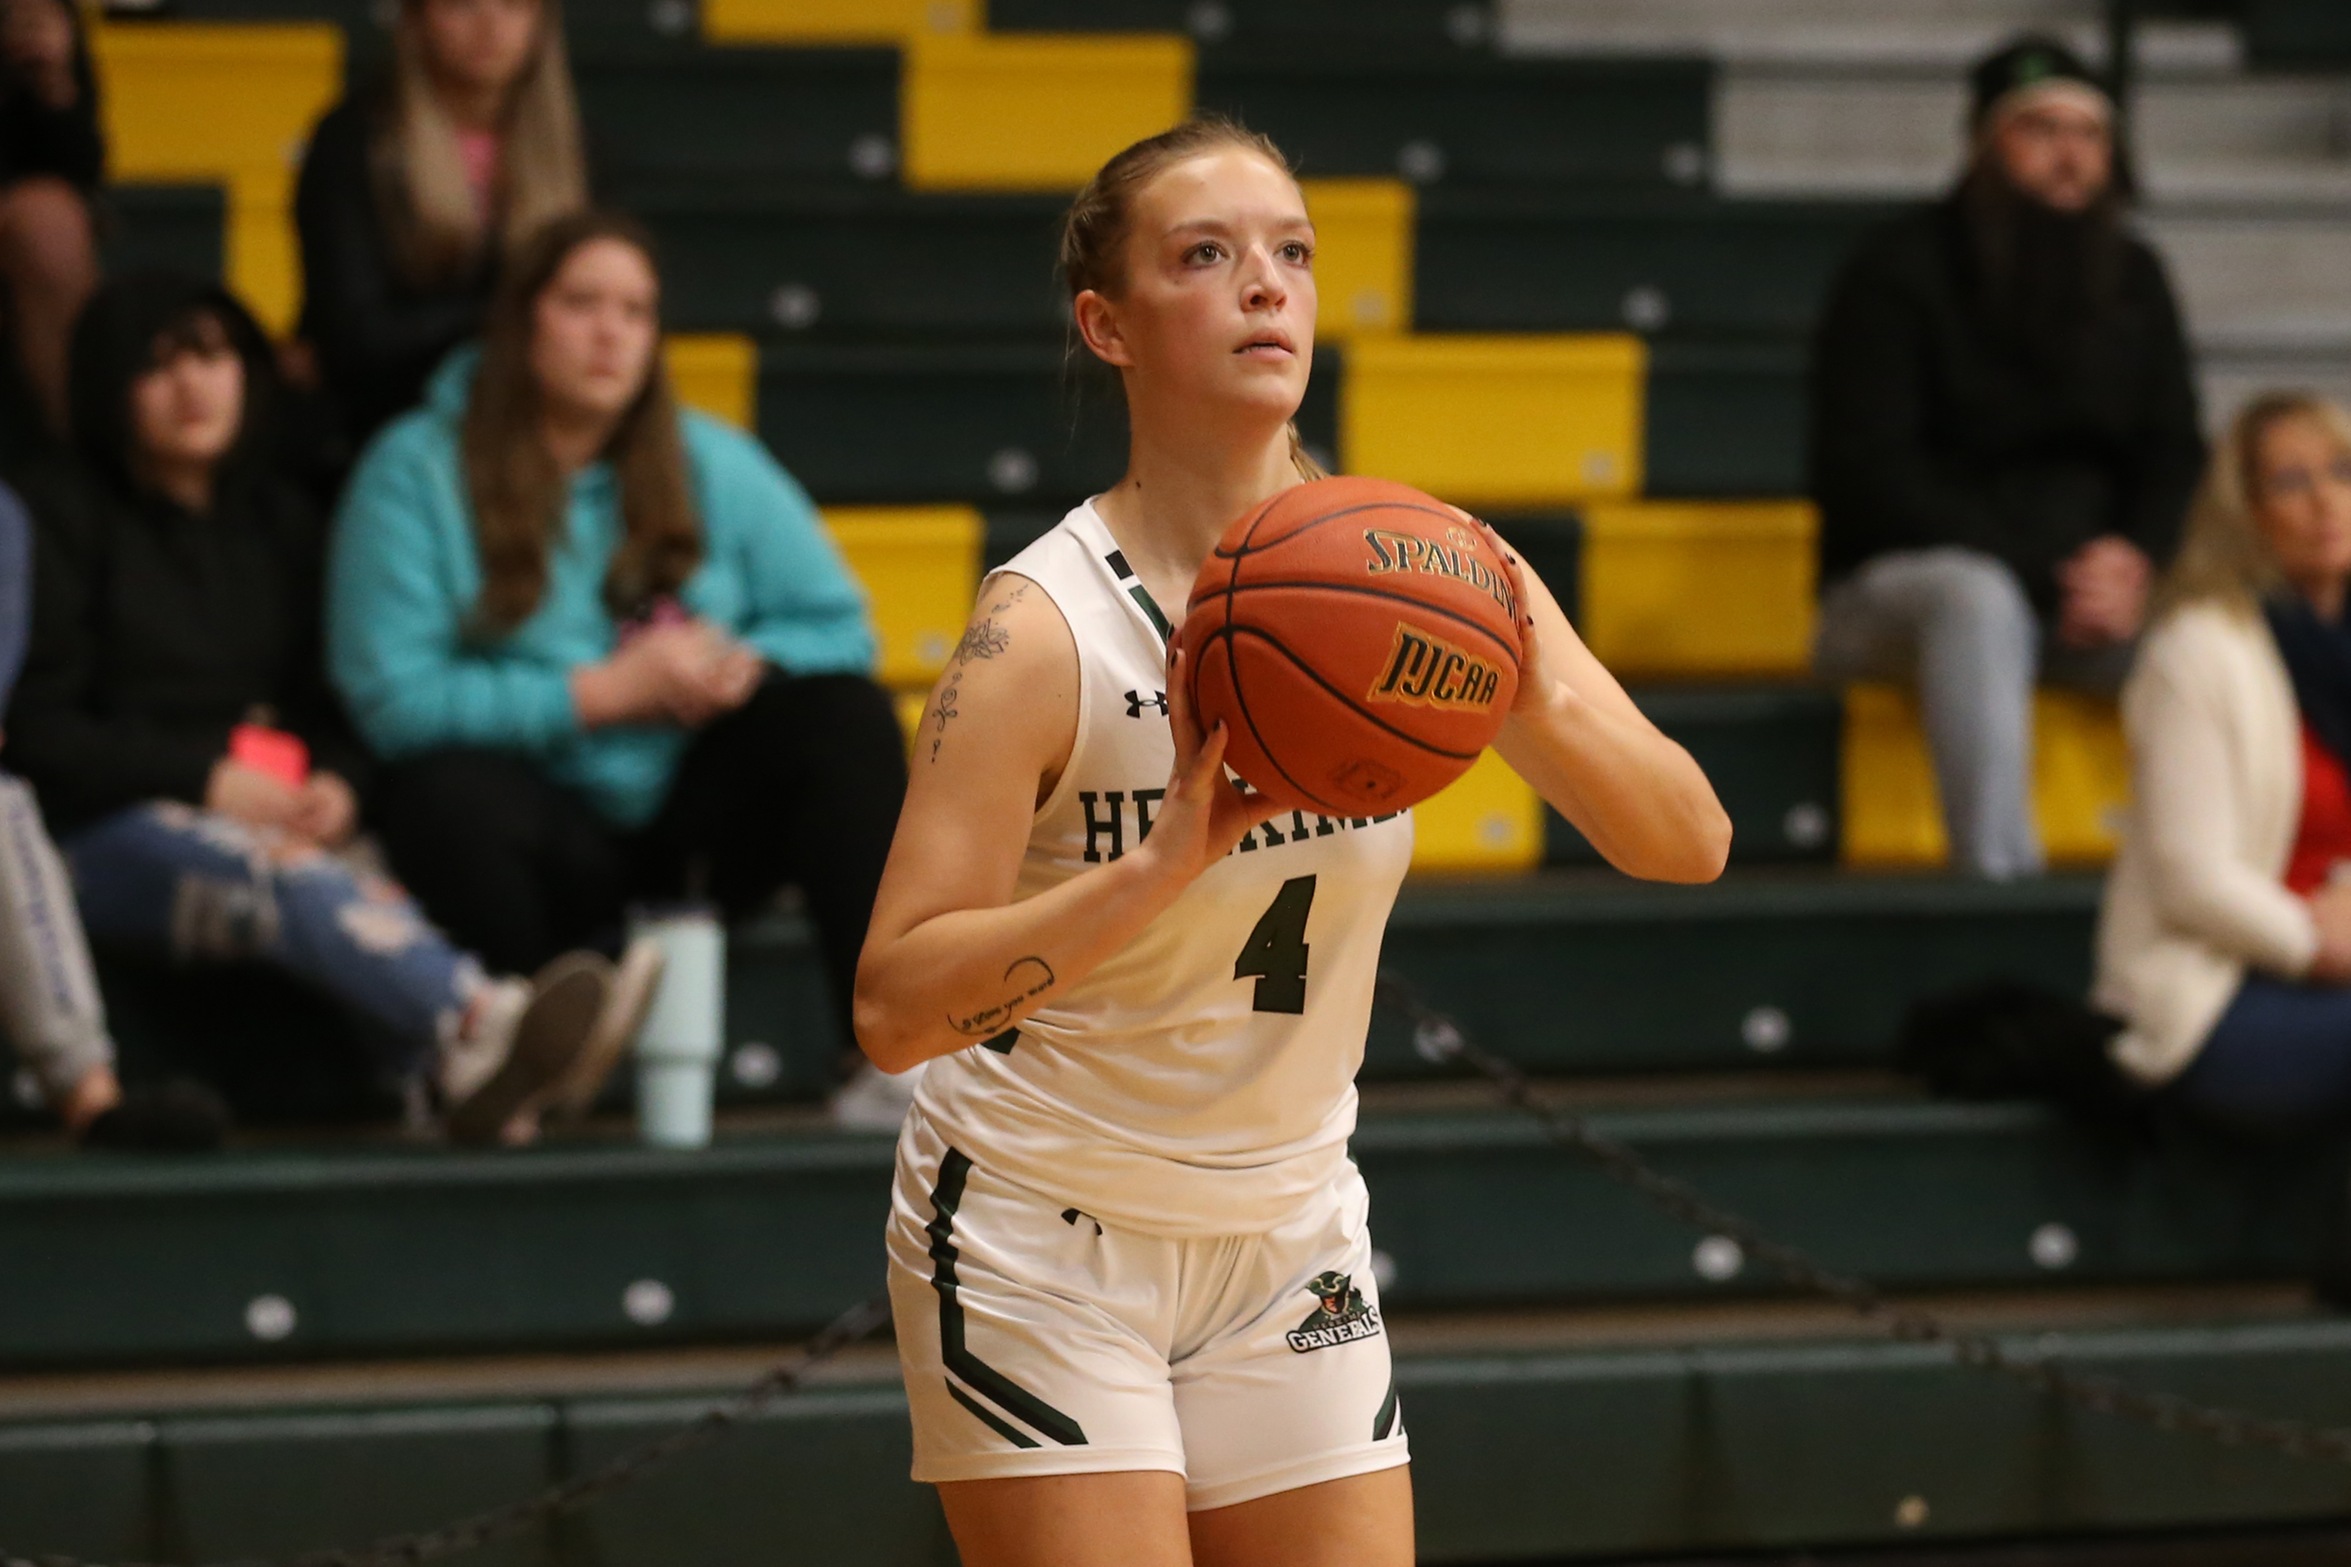 Dygert, Geisler Combine for 10 Three-Pointers in Win over Corning